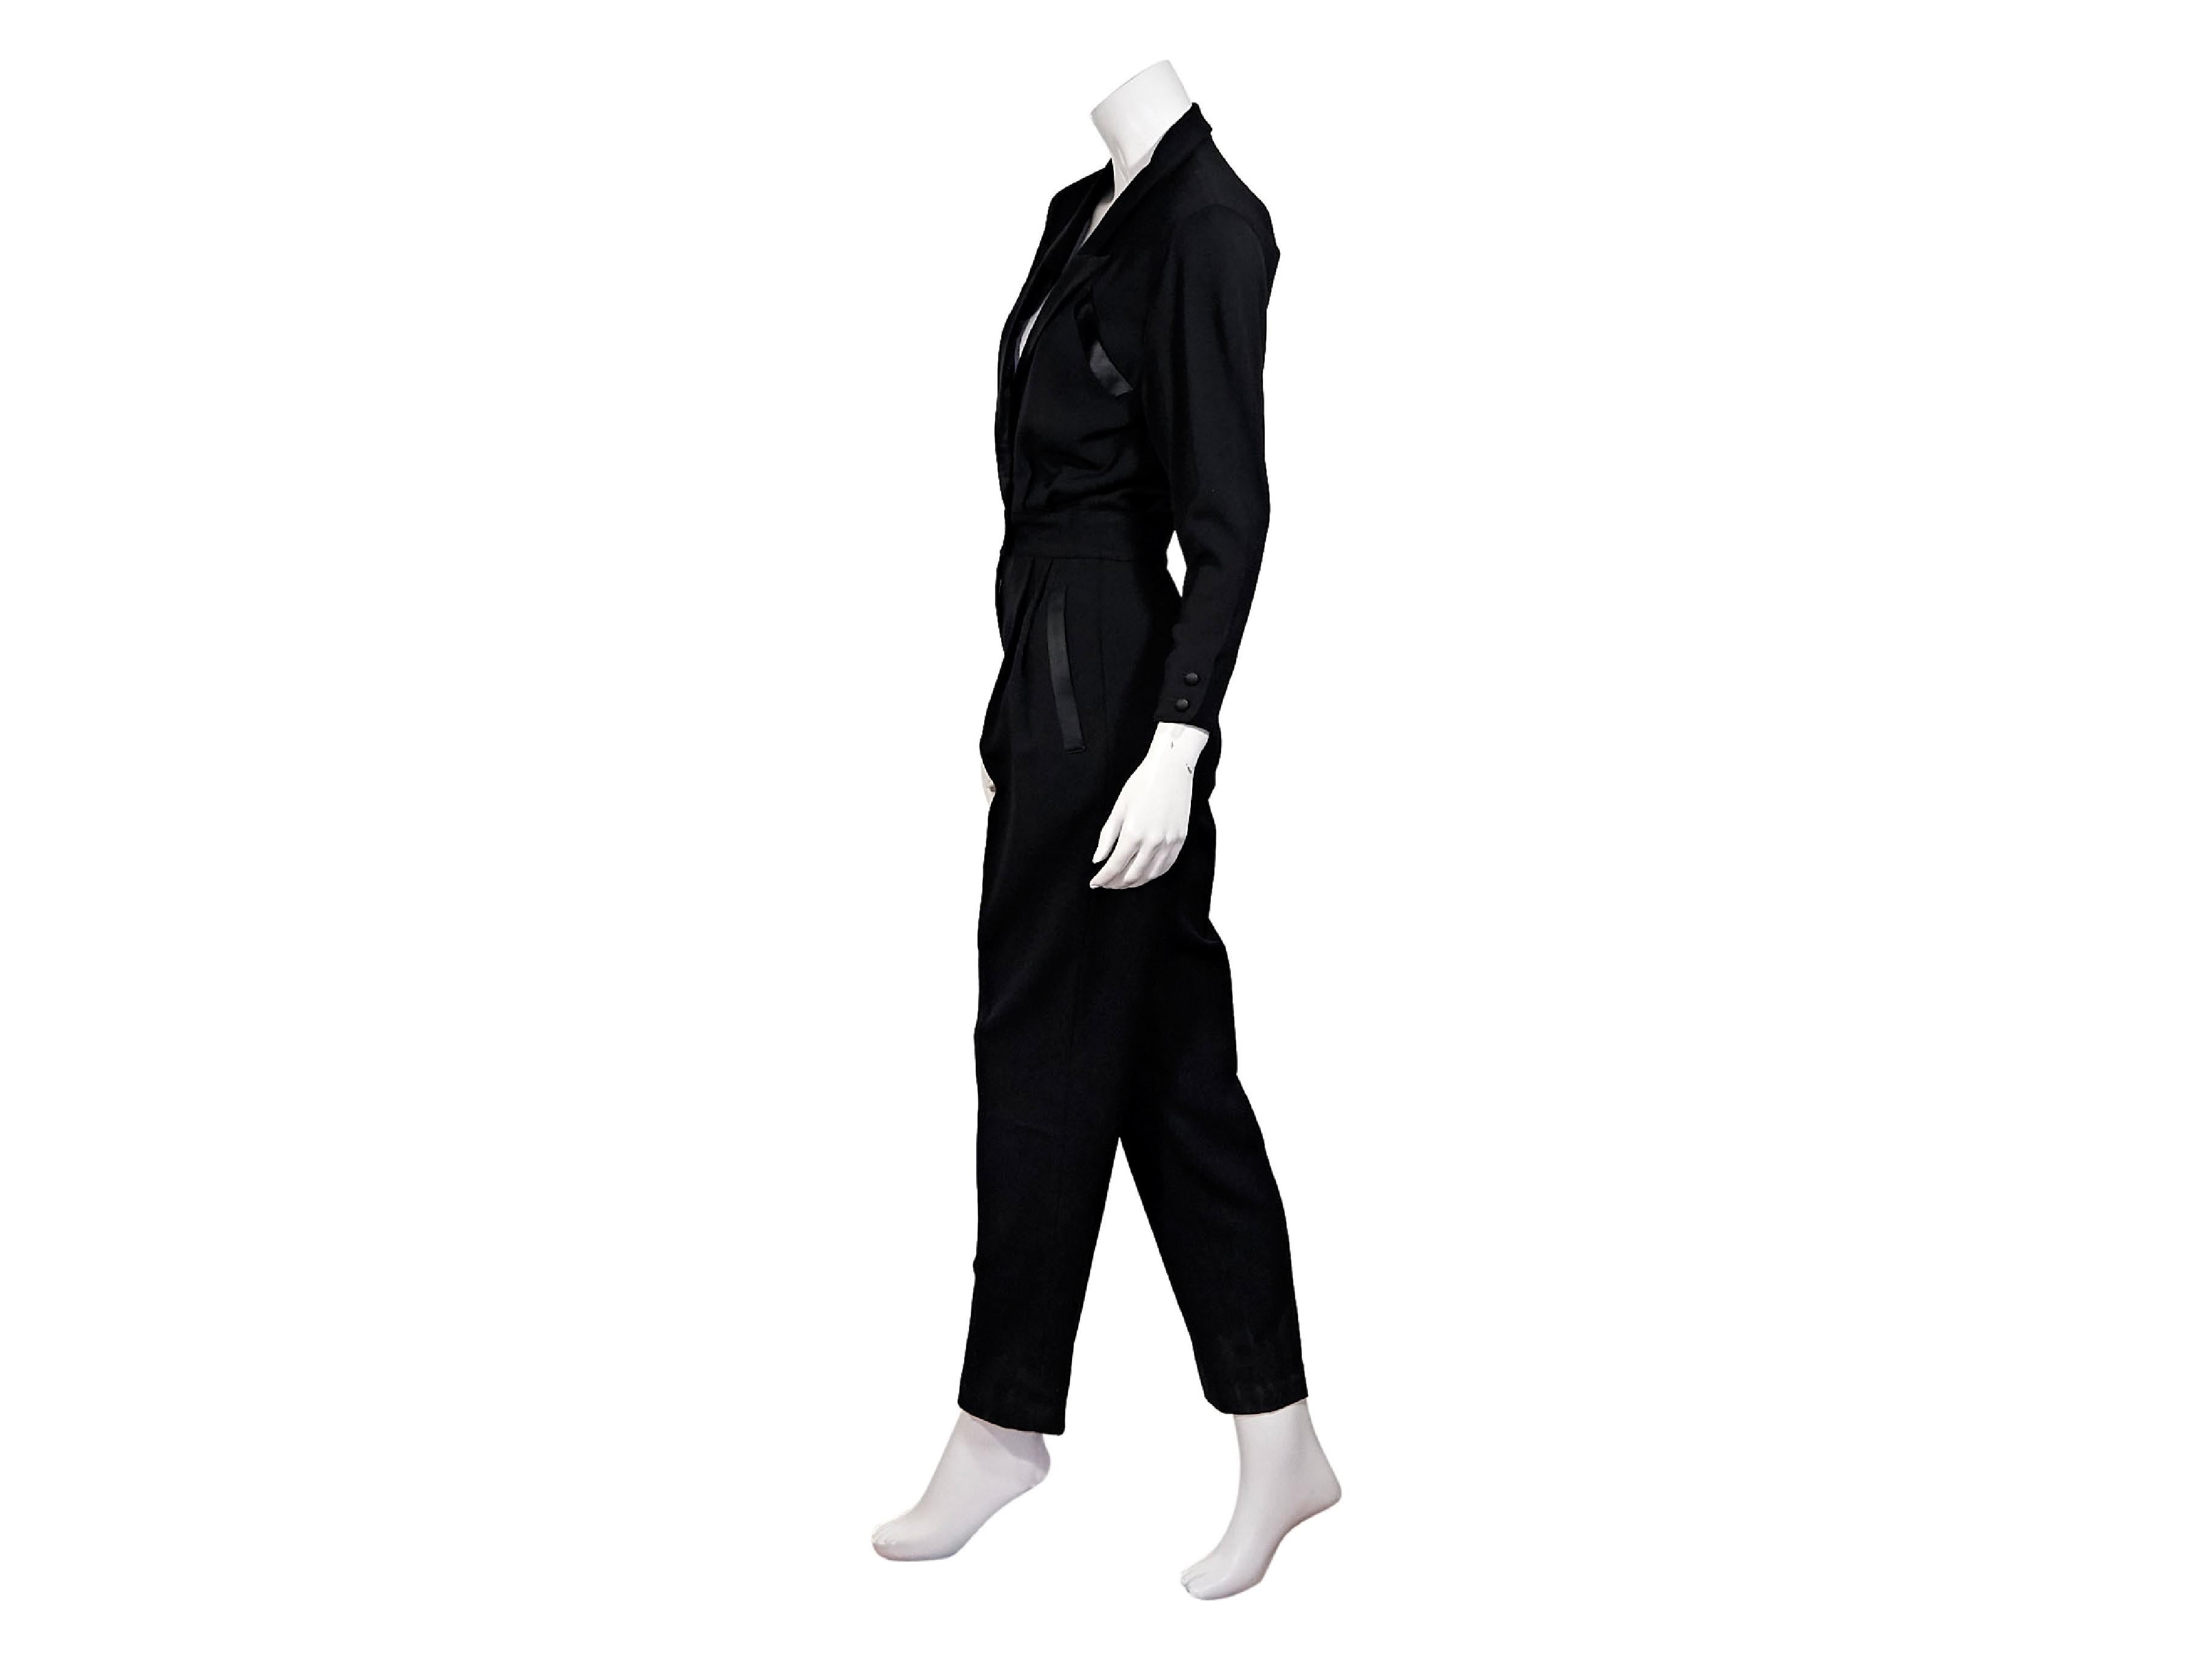 Product details:  Vintage black wool tuxedo jumpsuit by Escada.  Circa the 1980s.  Satin peaked lapel.  Three-quarter length sleeves.  Double-breasted button-front.  Chest besom pocket.  Pleats taper off banded waist.  Concealed zip fly.  Waist